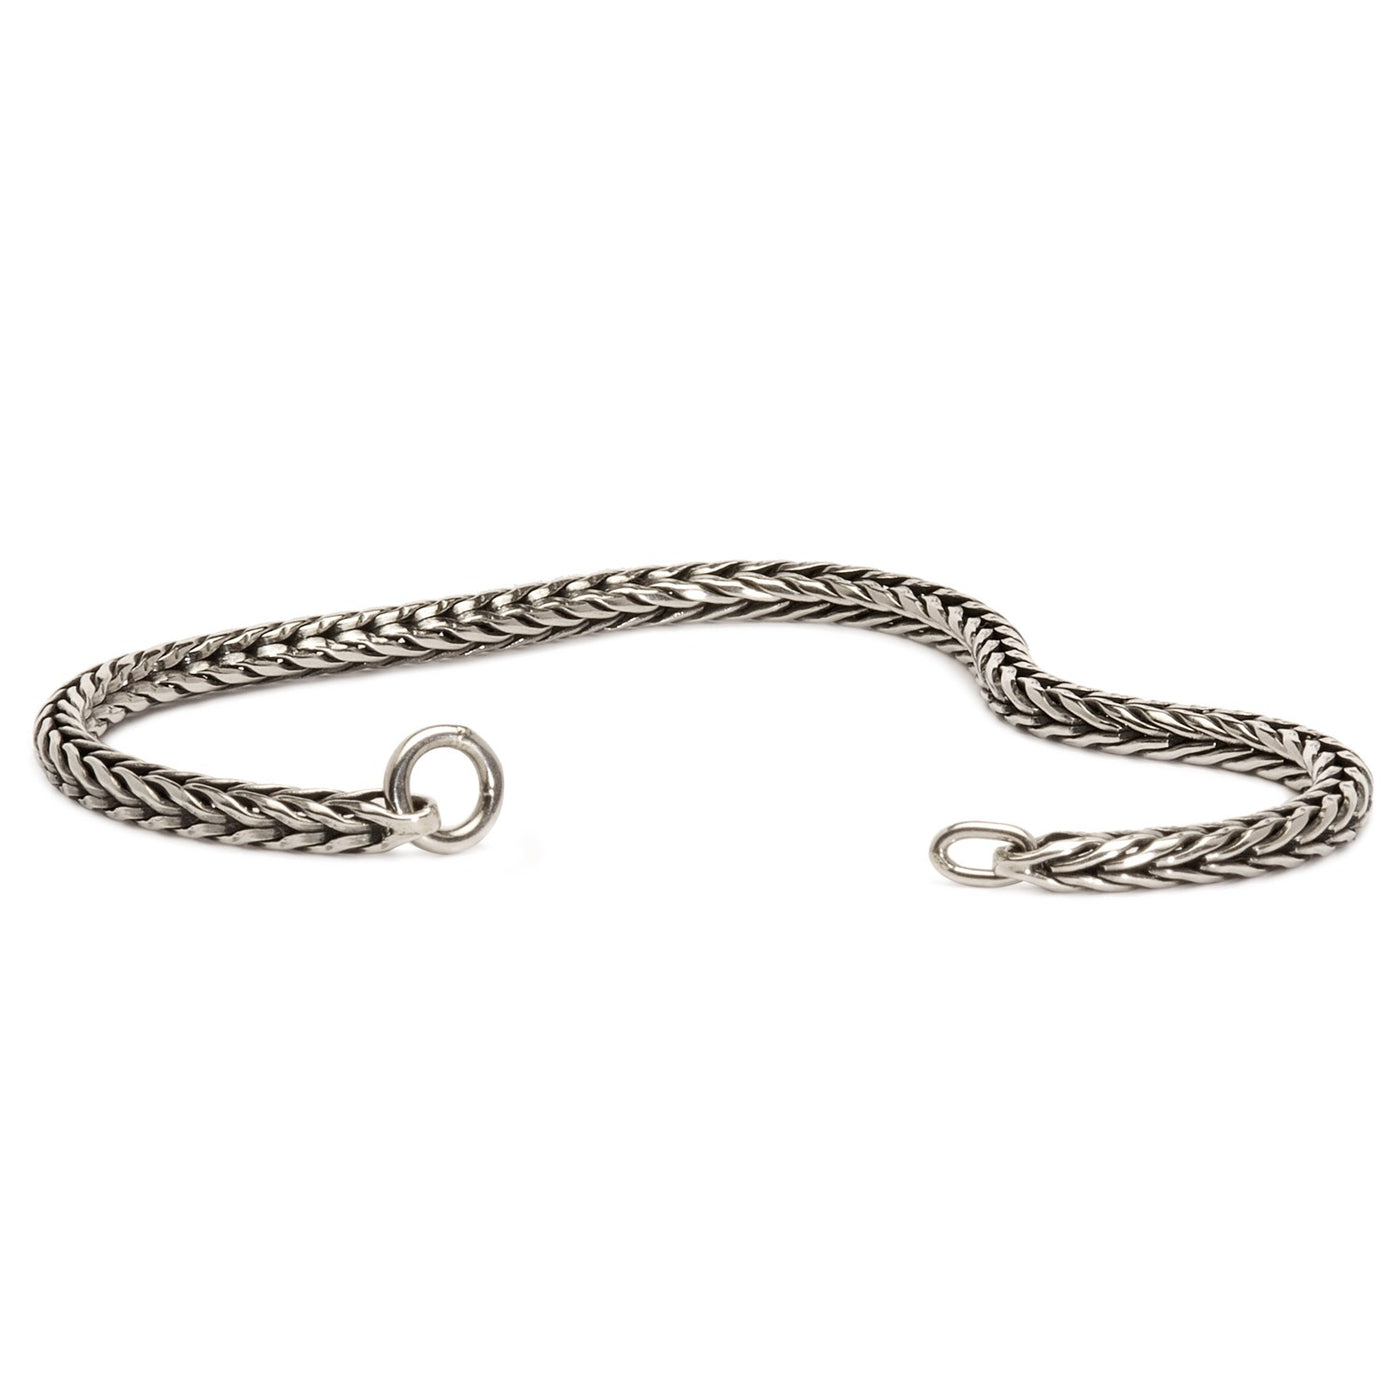 High quality Sterling silver foxtail chain with joints that are not soldered together, giving flexibility to the chain. This product does not include a clasp.